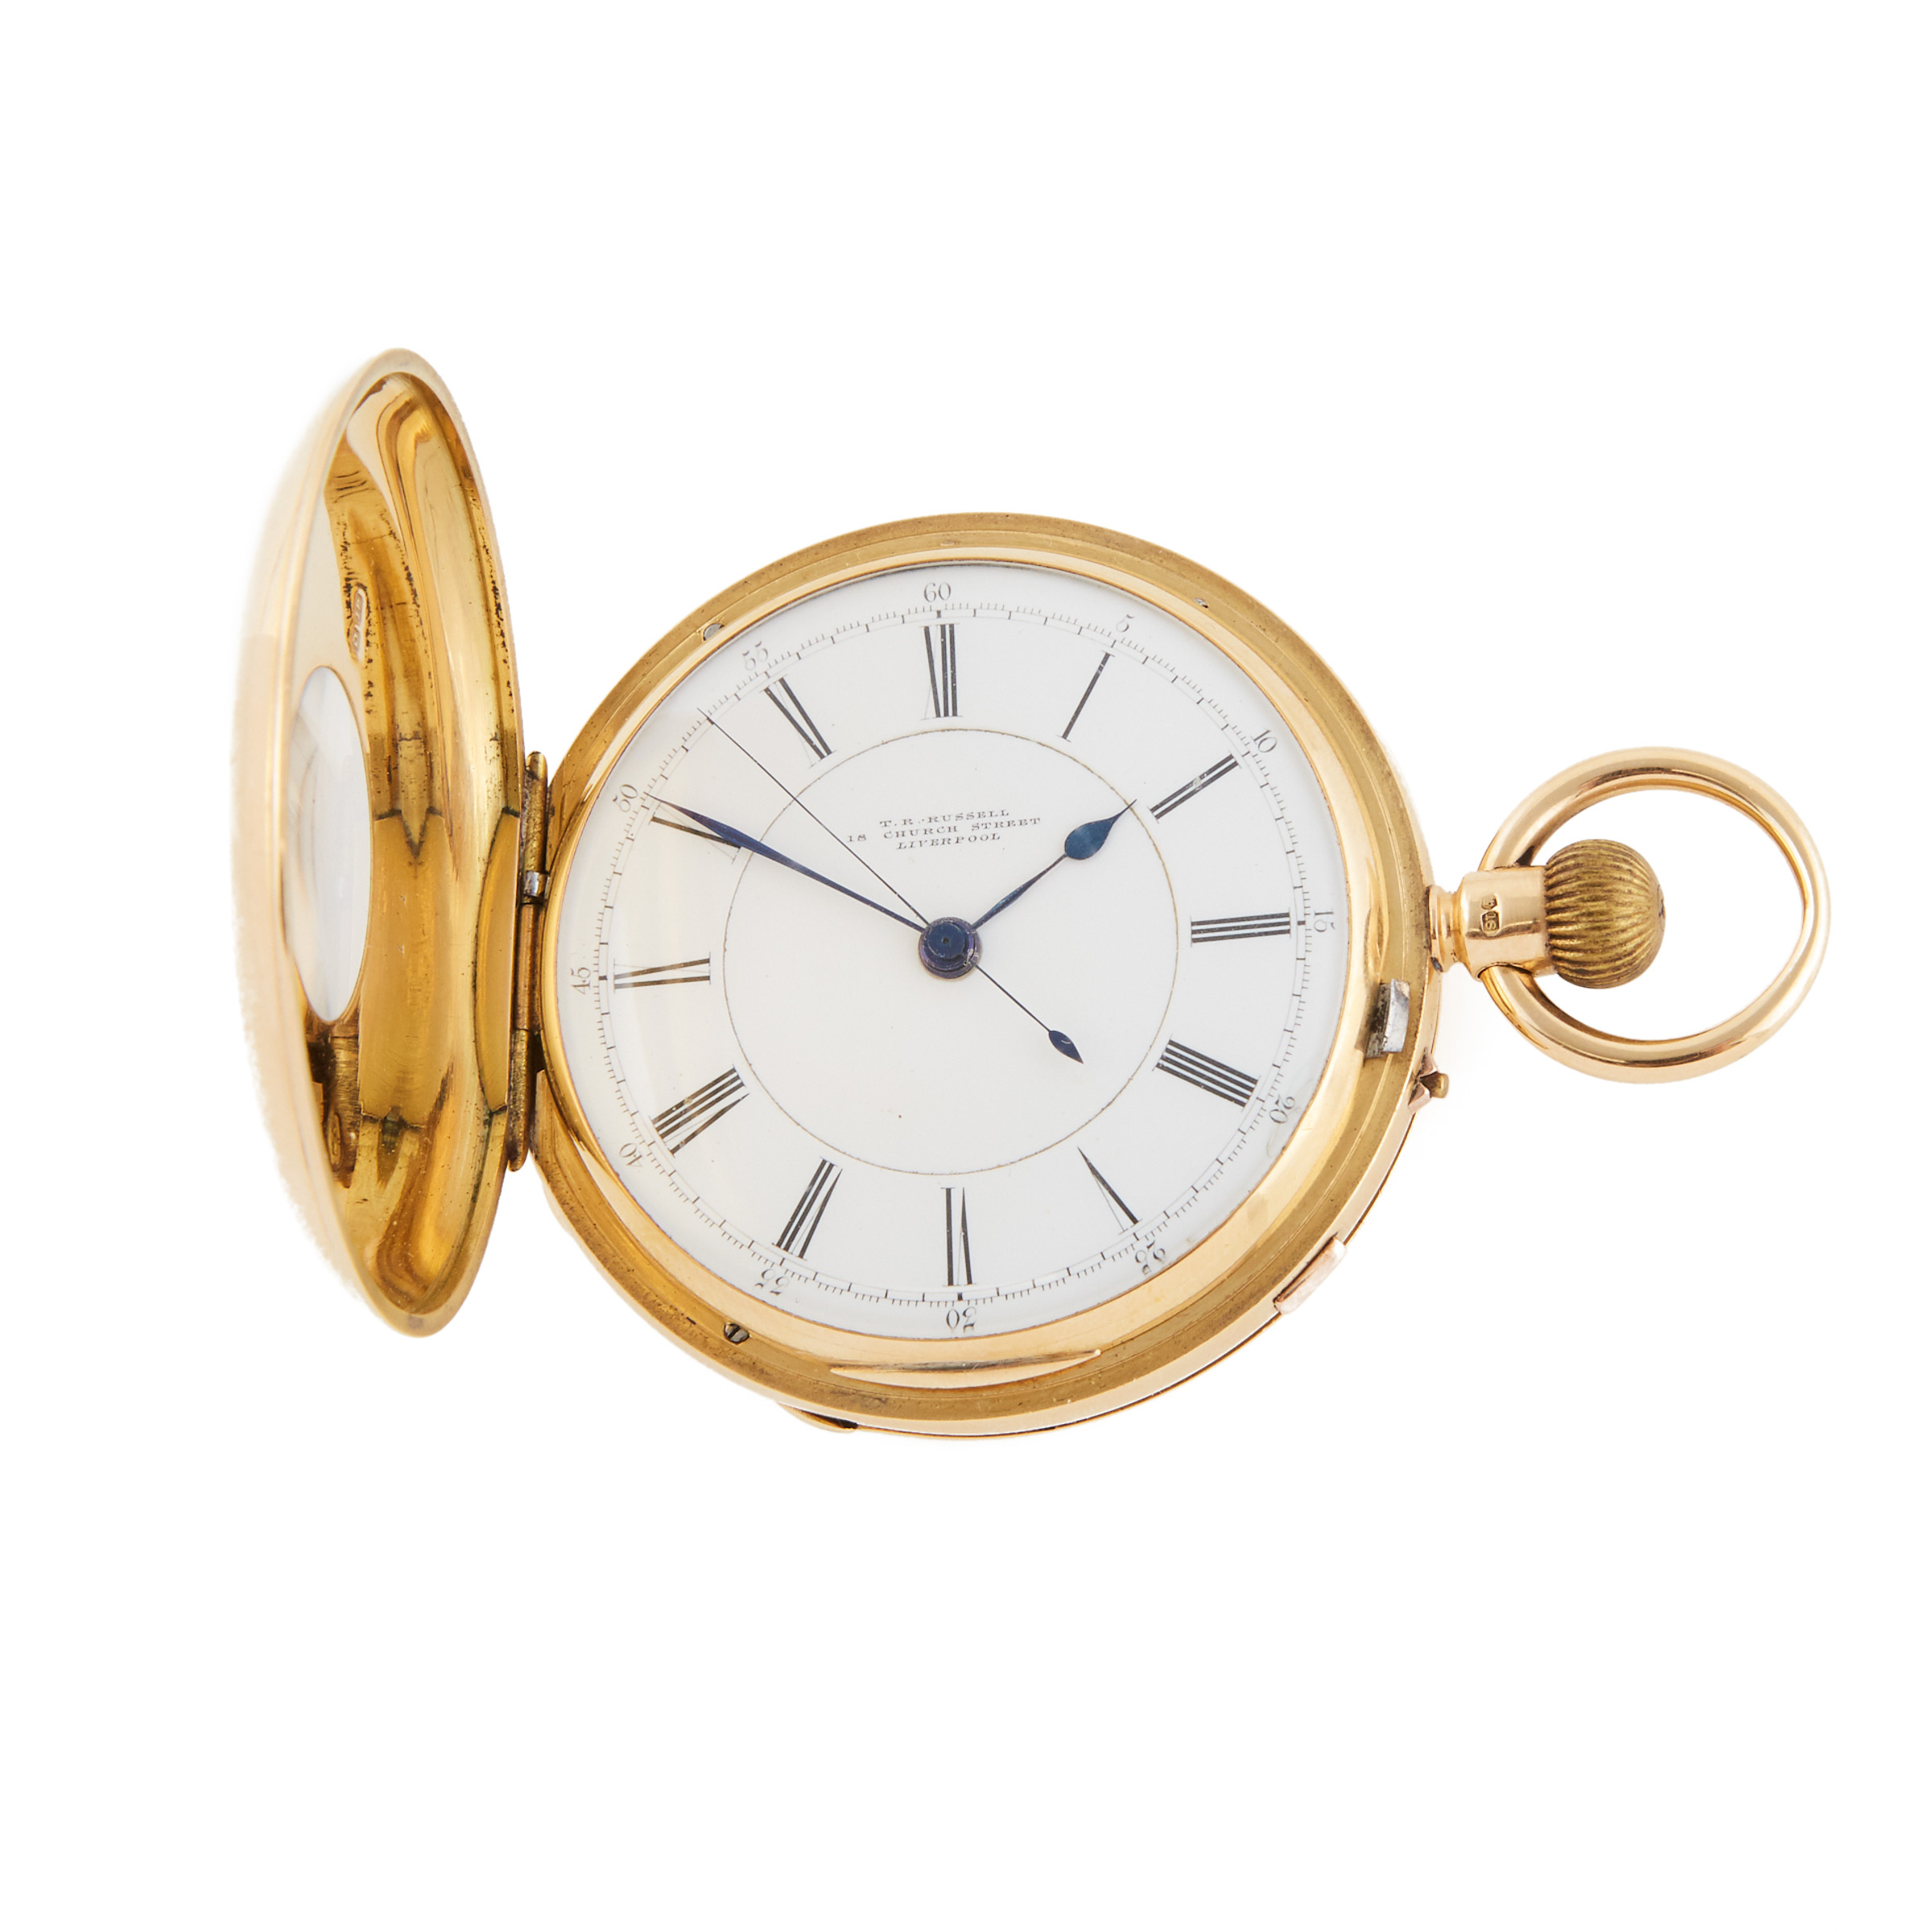 Thomas Russell Of Liverpool Stem Wind, Pin-Set Stop/Start Chronograph Pocket Watch